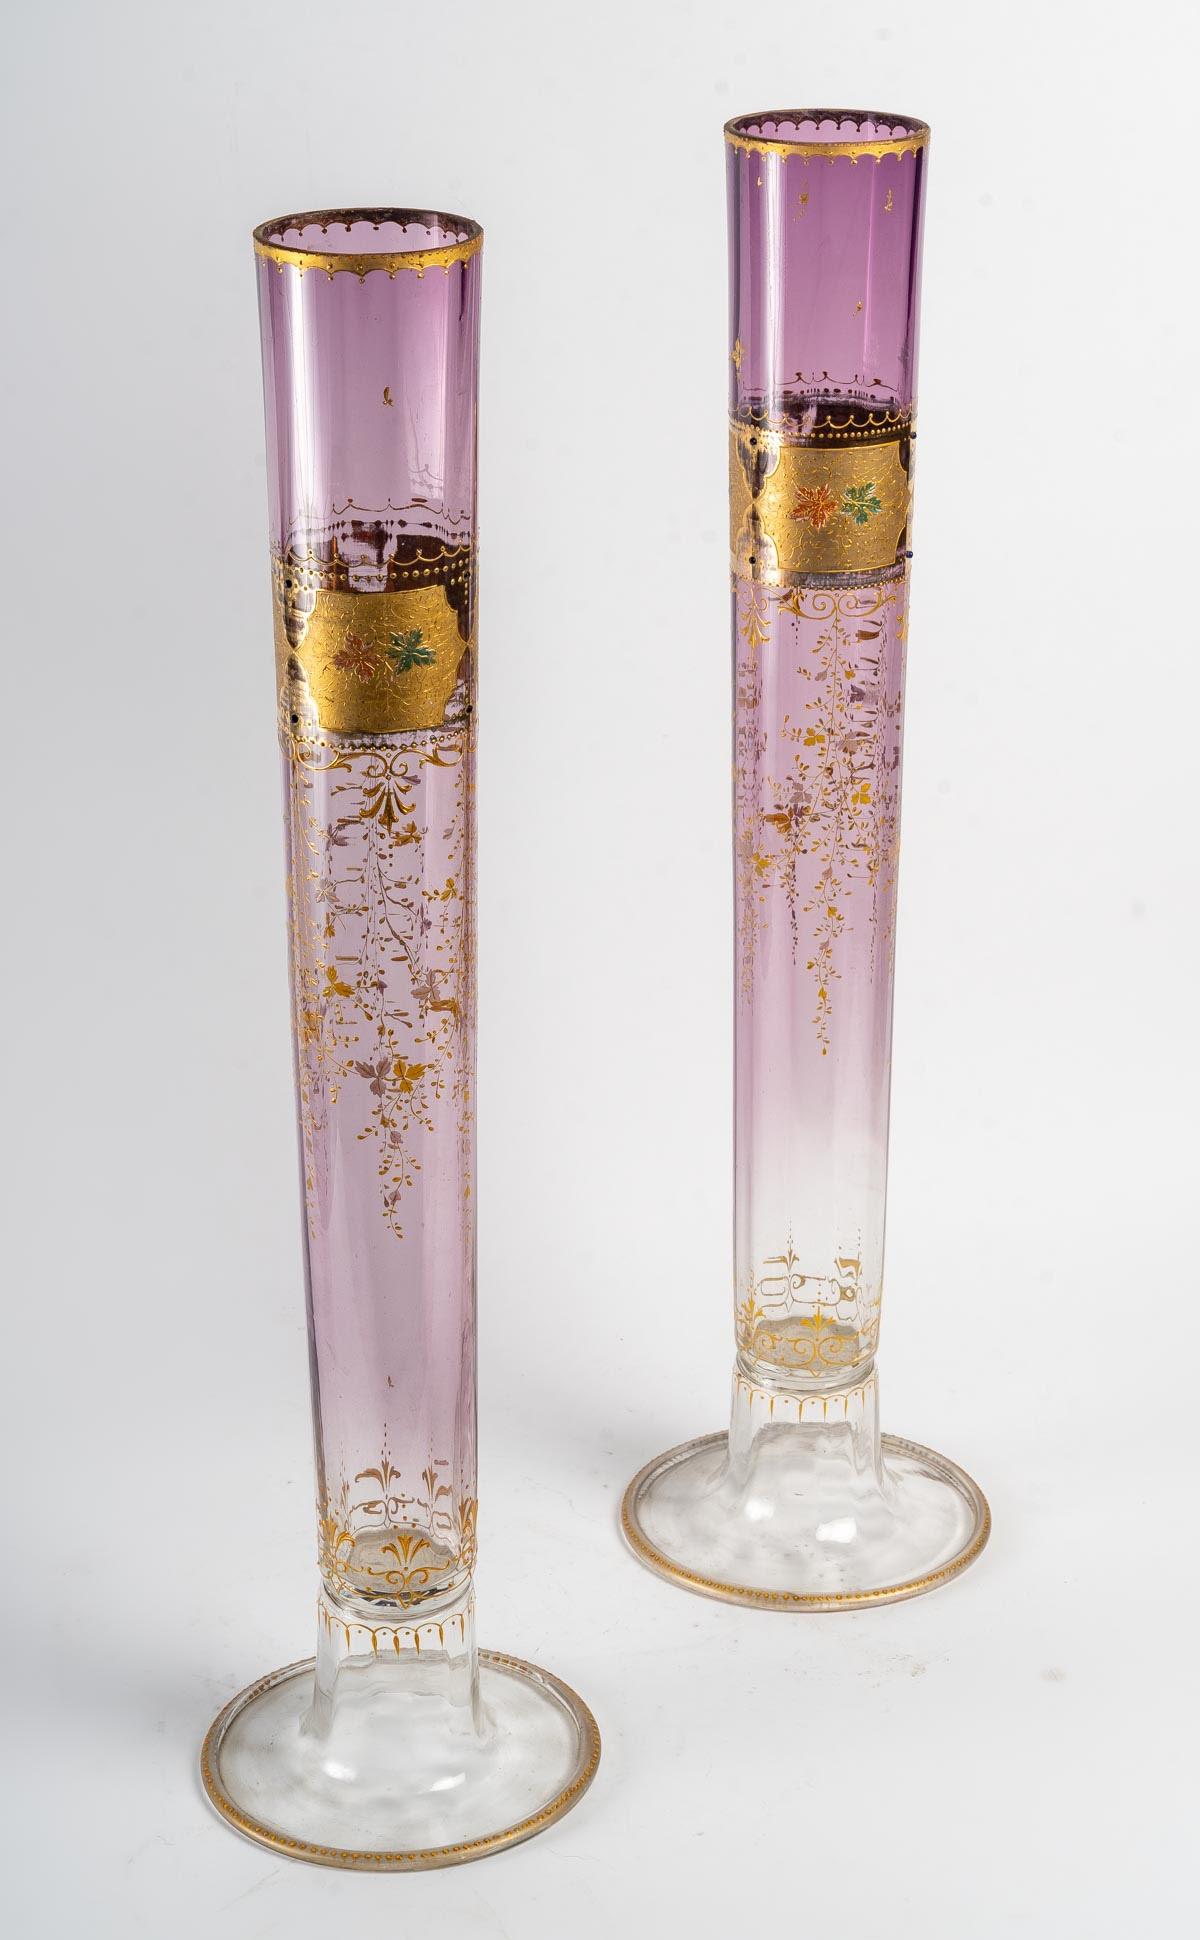 A pair of Hungarian crystal vases, 19th century antique, Napoleon III period.
Measures: H: 65 cm, D: 17 cm.